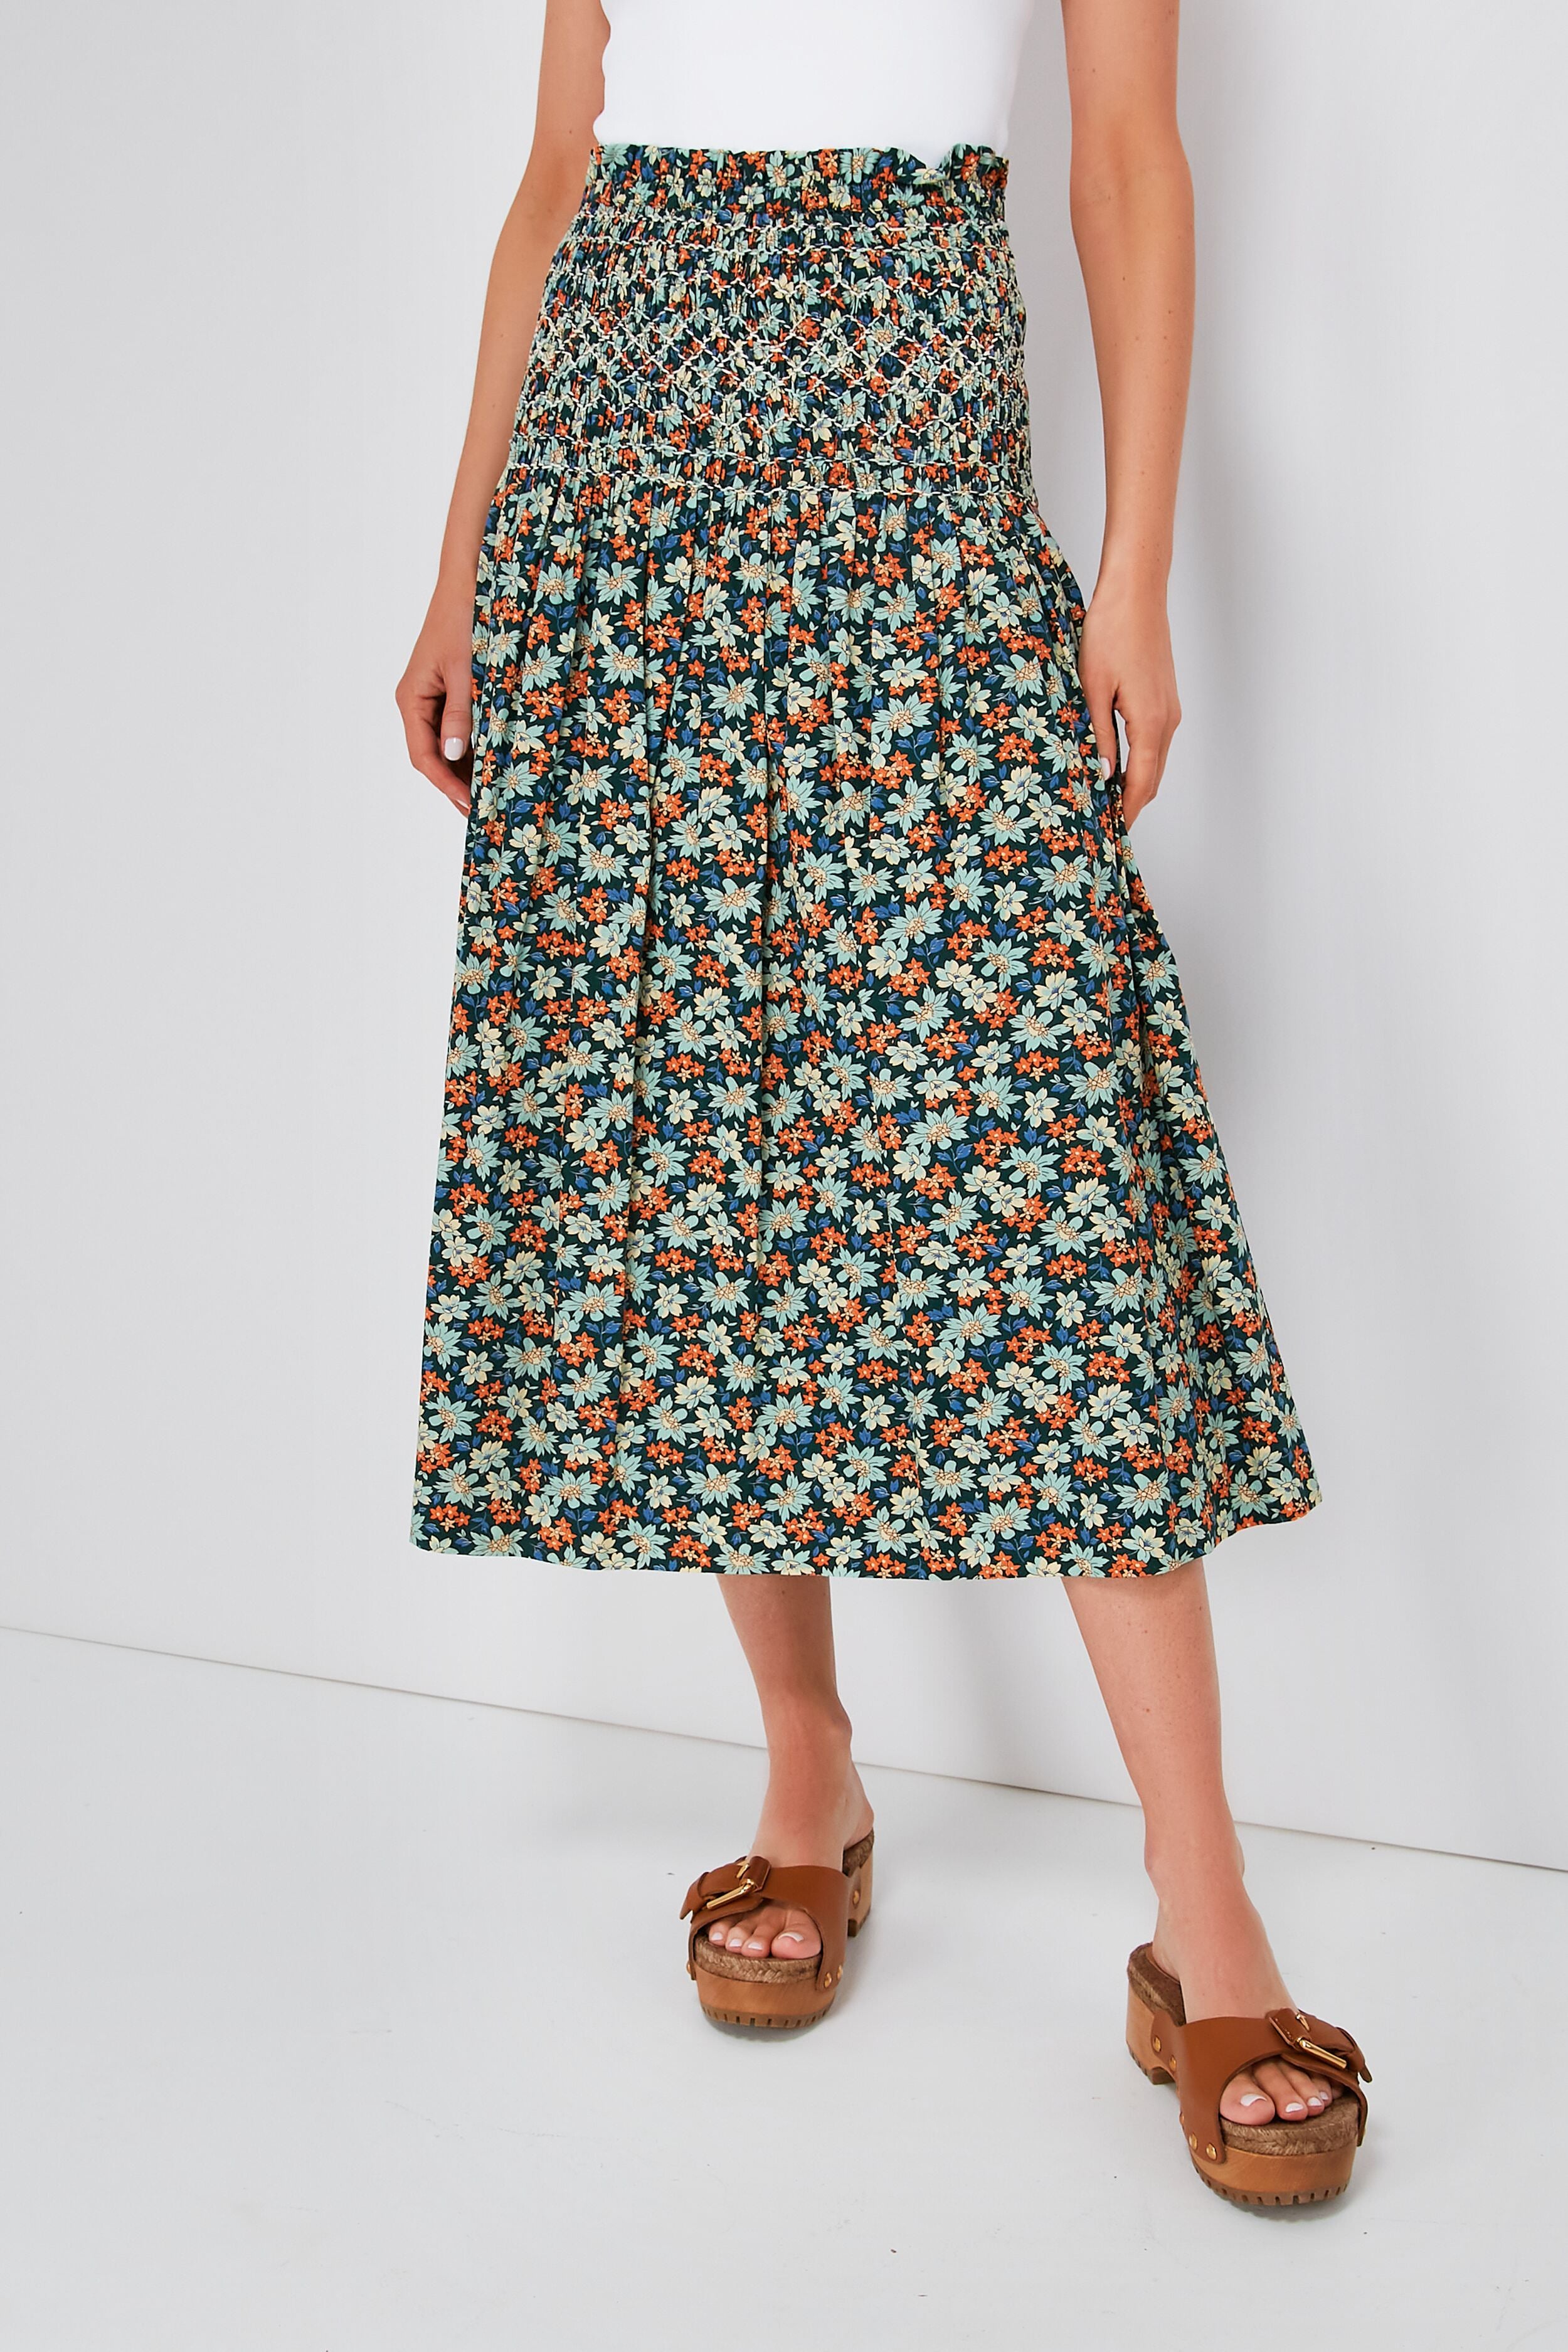 Forrest Floral Peggy Skirt | Sea New York